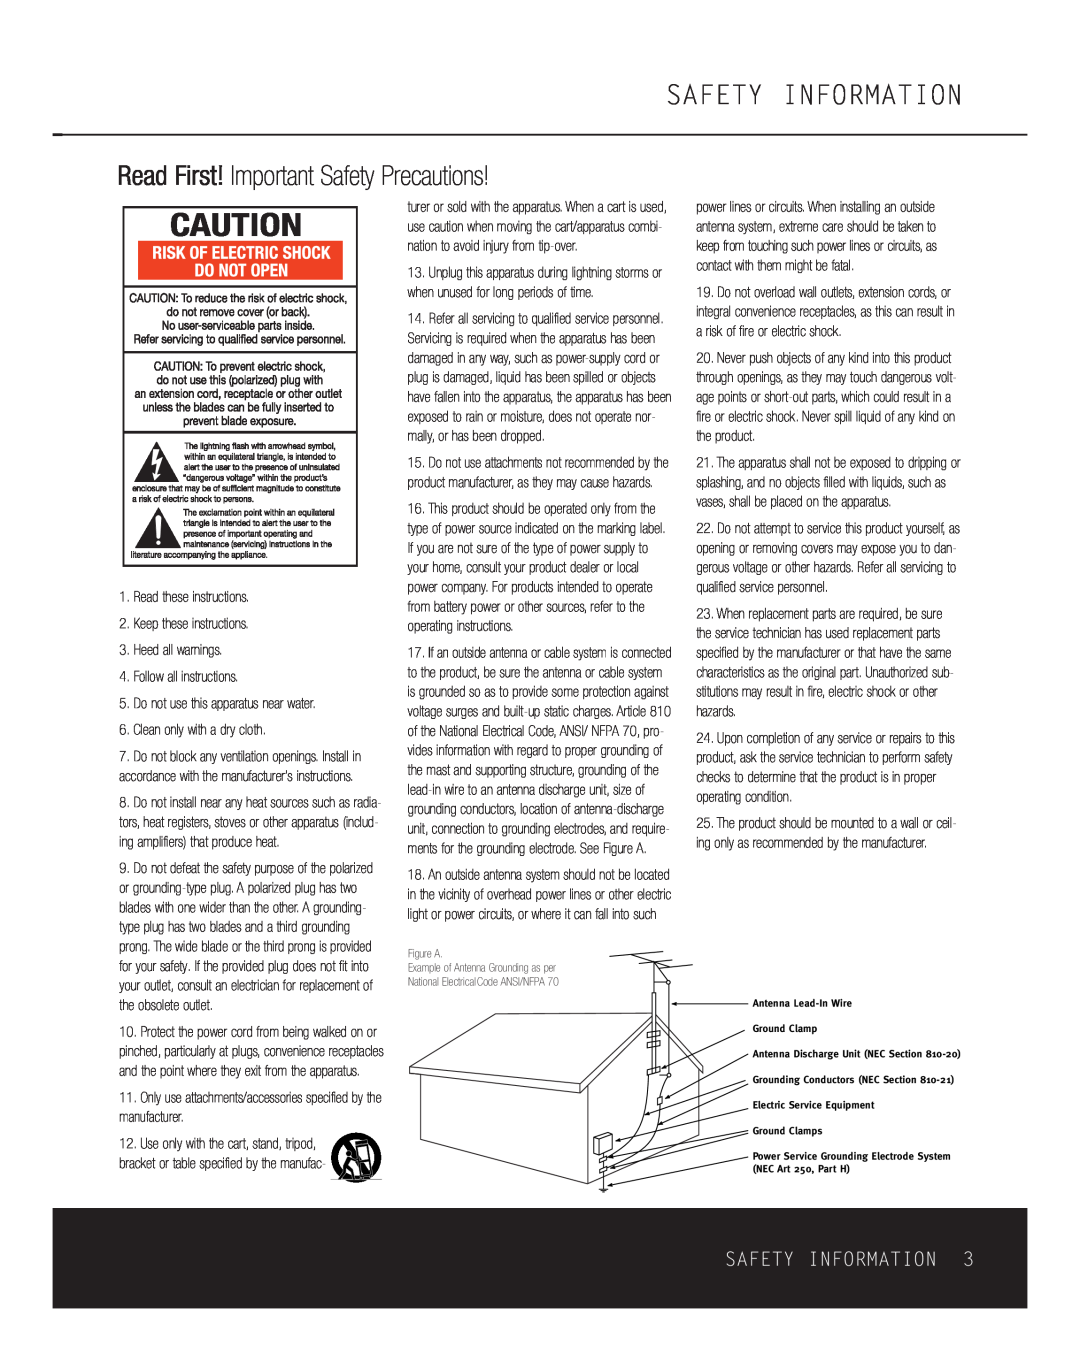 Harman-Kardon HKTS11 owner manual Safety Information, Read First! Important Safety Precautions, Read these instructions 